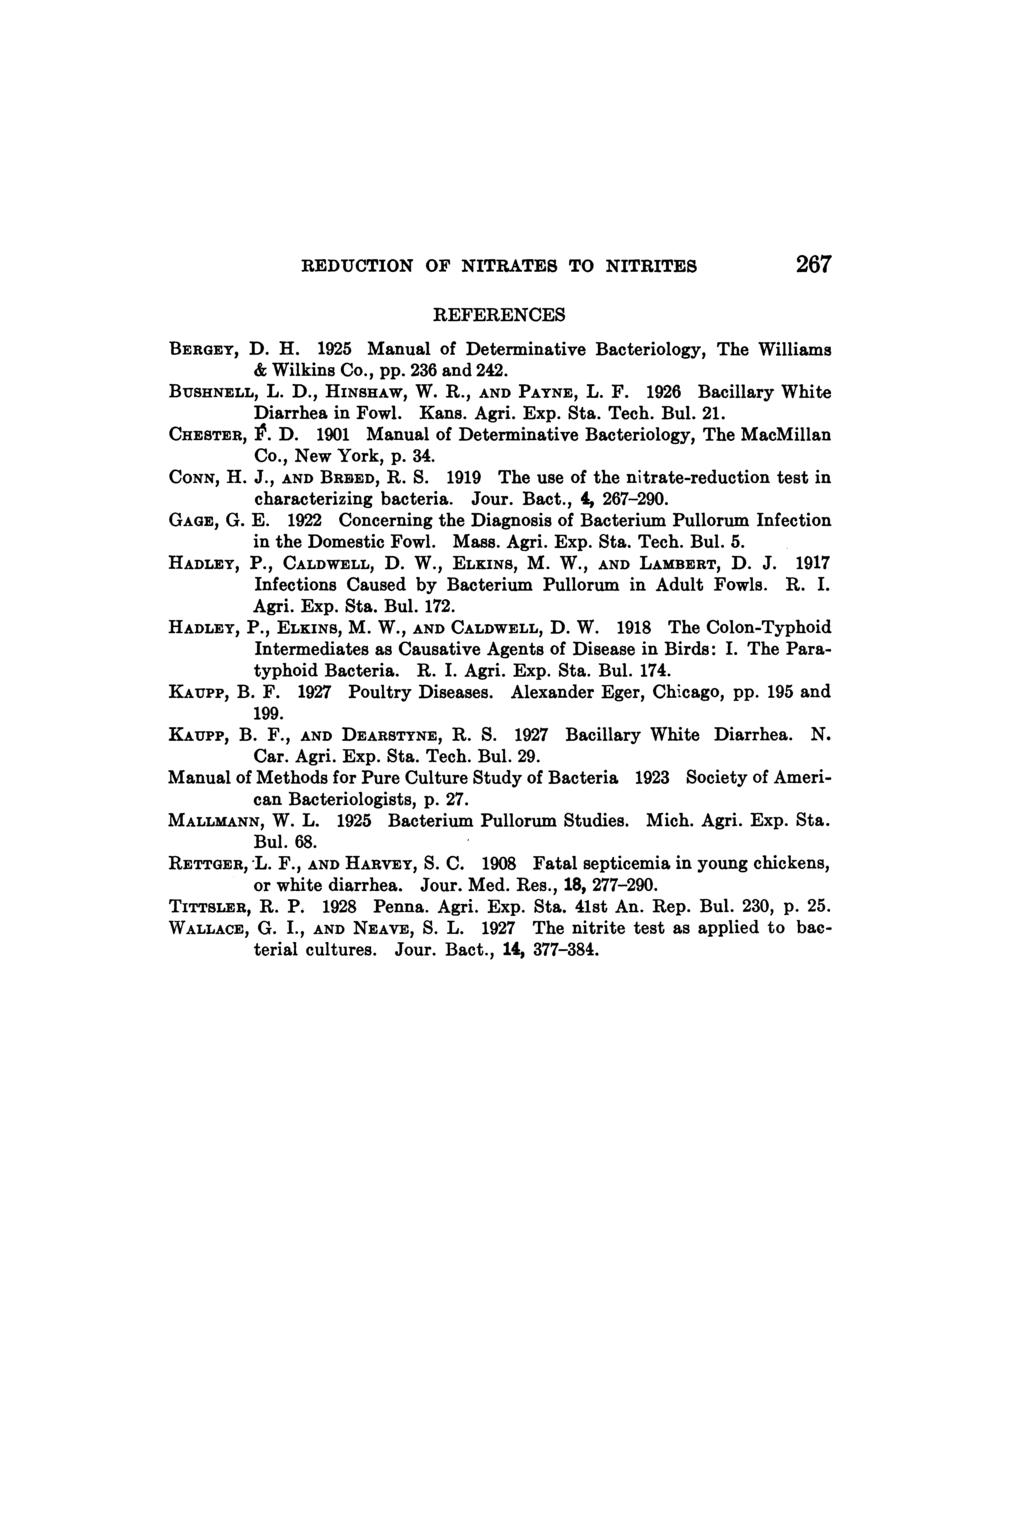 REDUCTION OF NITRATES TO NITRITES 267 REFERENCES BERGEY, D. H. 1925 Manual of Determinative Bacteriology, The Williams & Wilkins Co., pp. 236 and 242. BUSHNELL, L. D., HINSHAW, W. R., AND PAYNE, L. F.